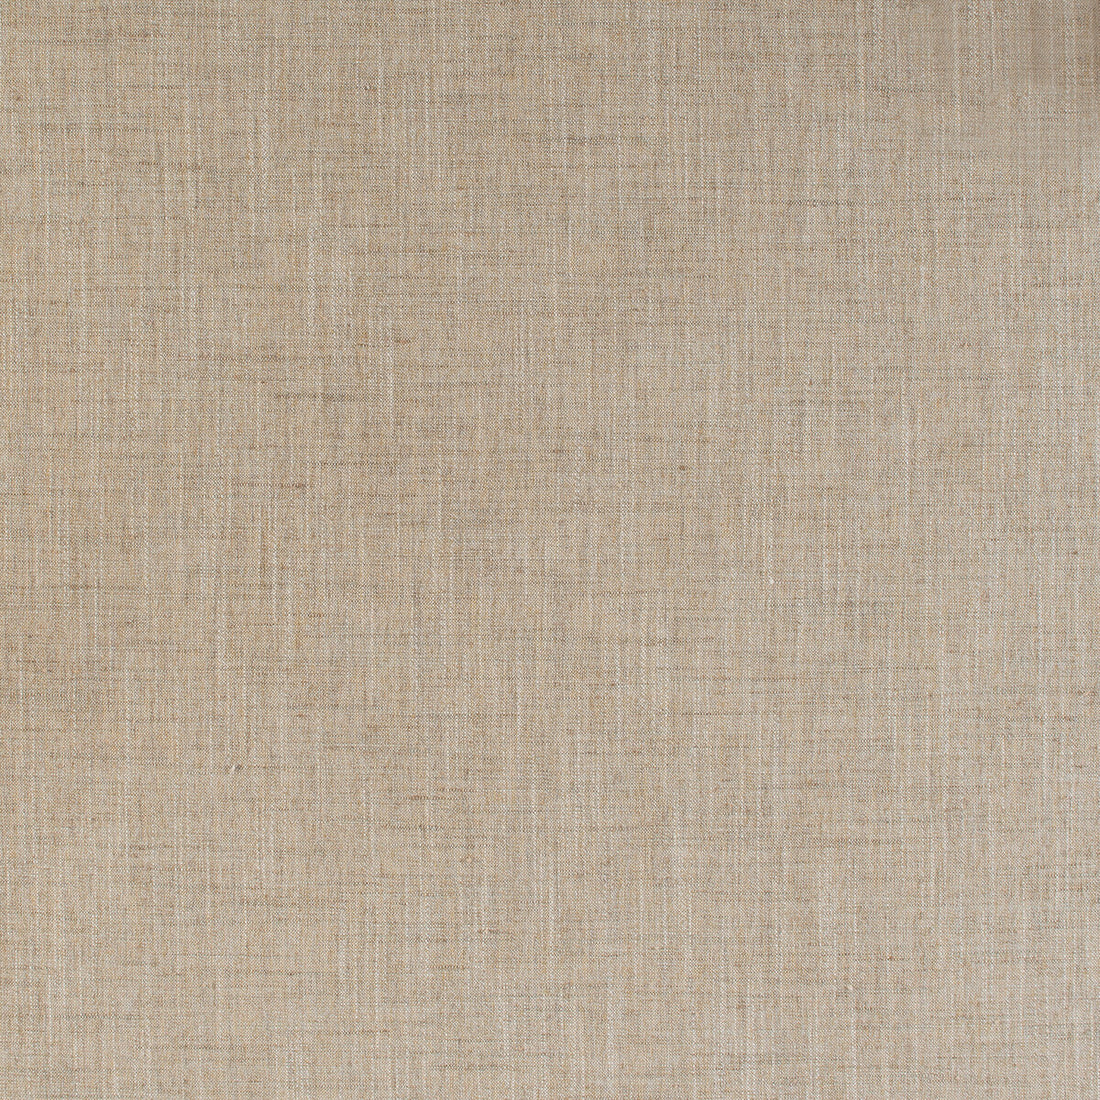 Groundcover fabric in flax color - pattern 35911.116.0 - by Kravet Design in the Barbara Barry Home Midsummer collection